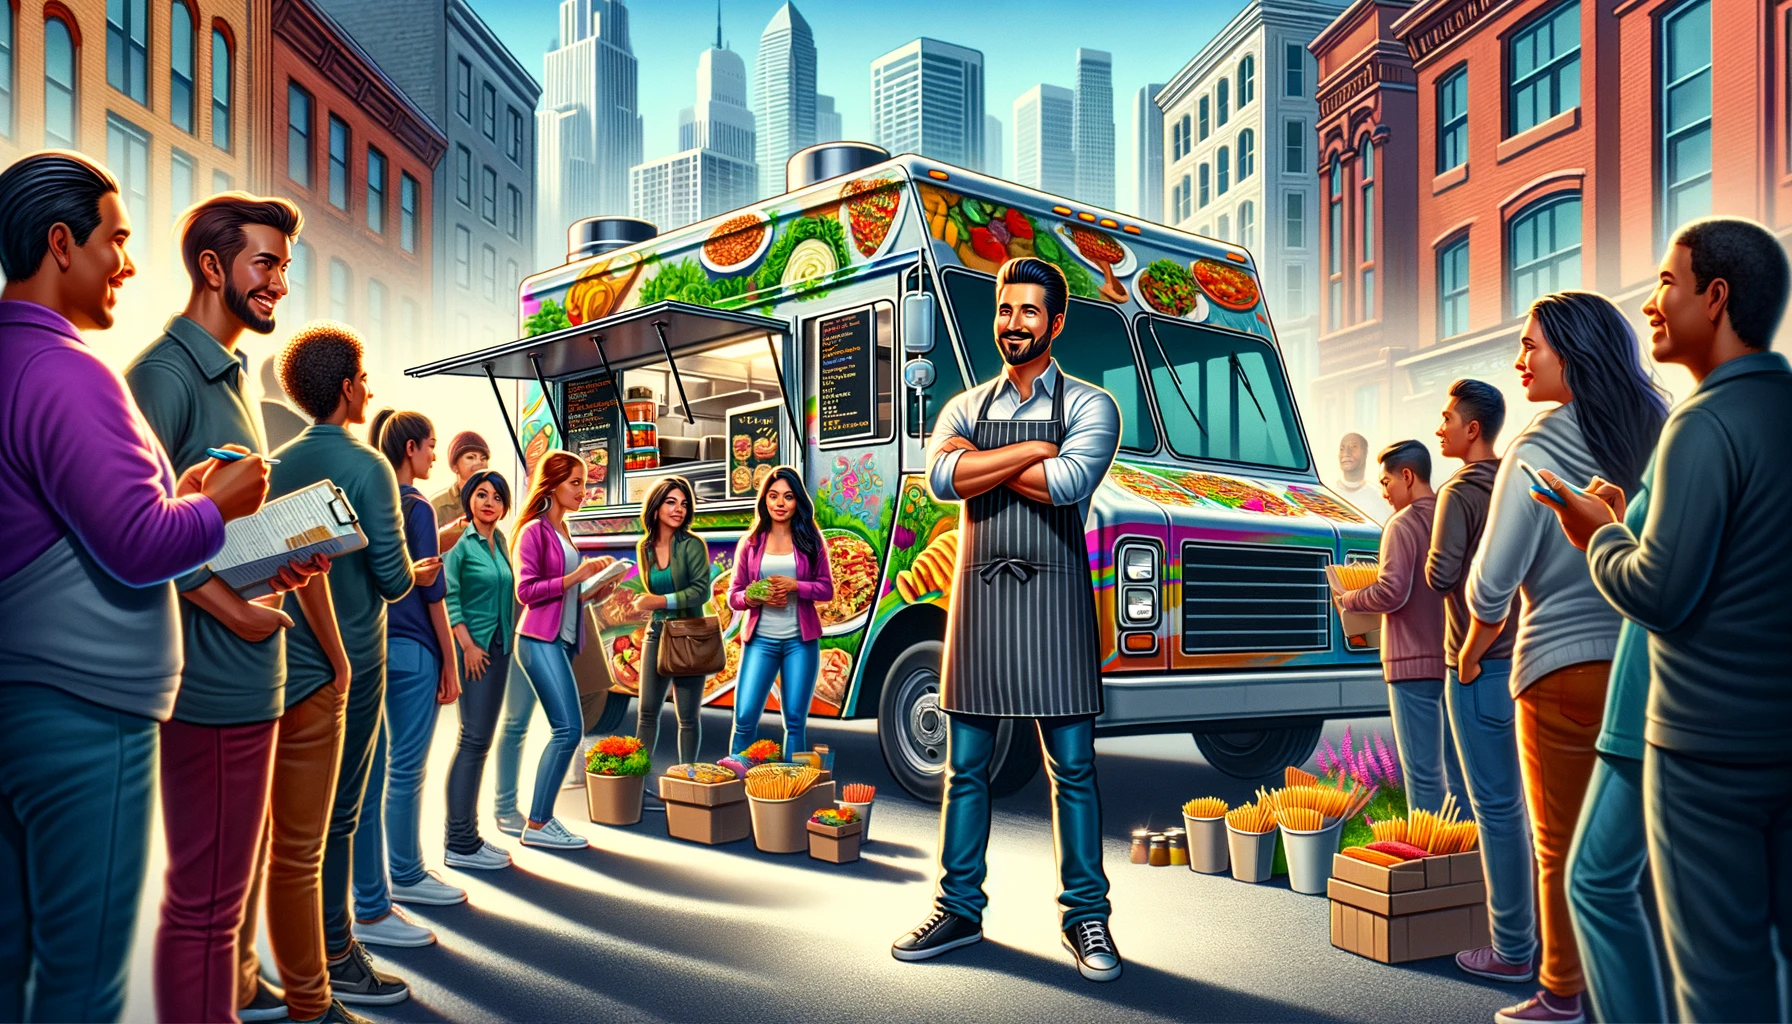 A motivating image showcasing a food truck entrepreneur serving eager customers, symbolizing the journey of building a thriving mobile restaurant business 